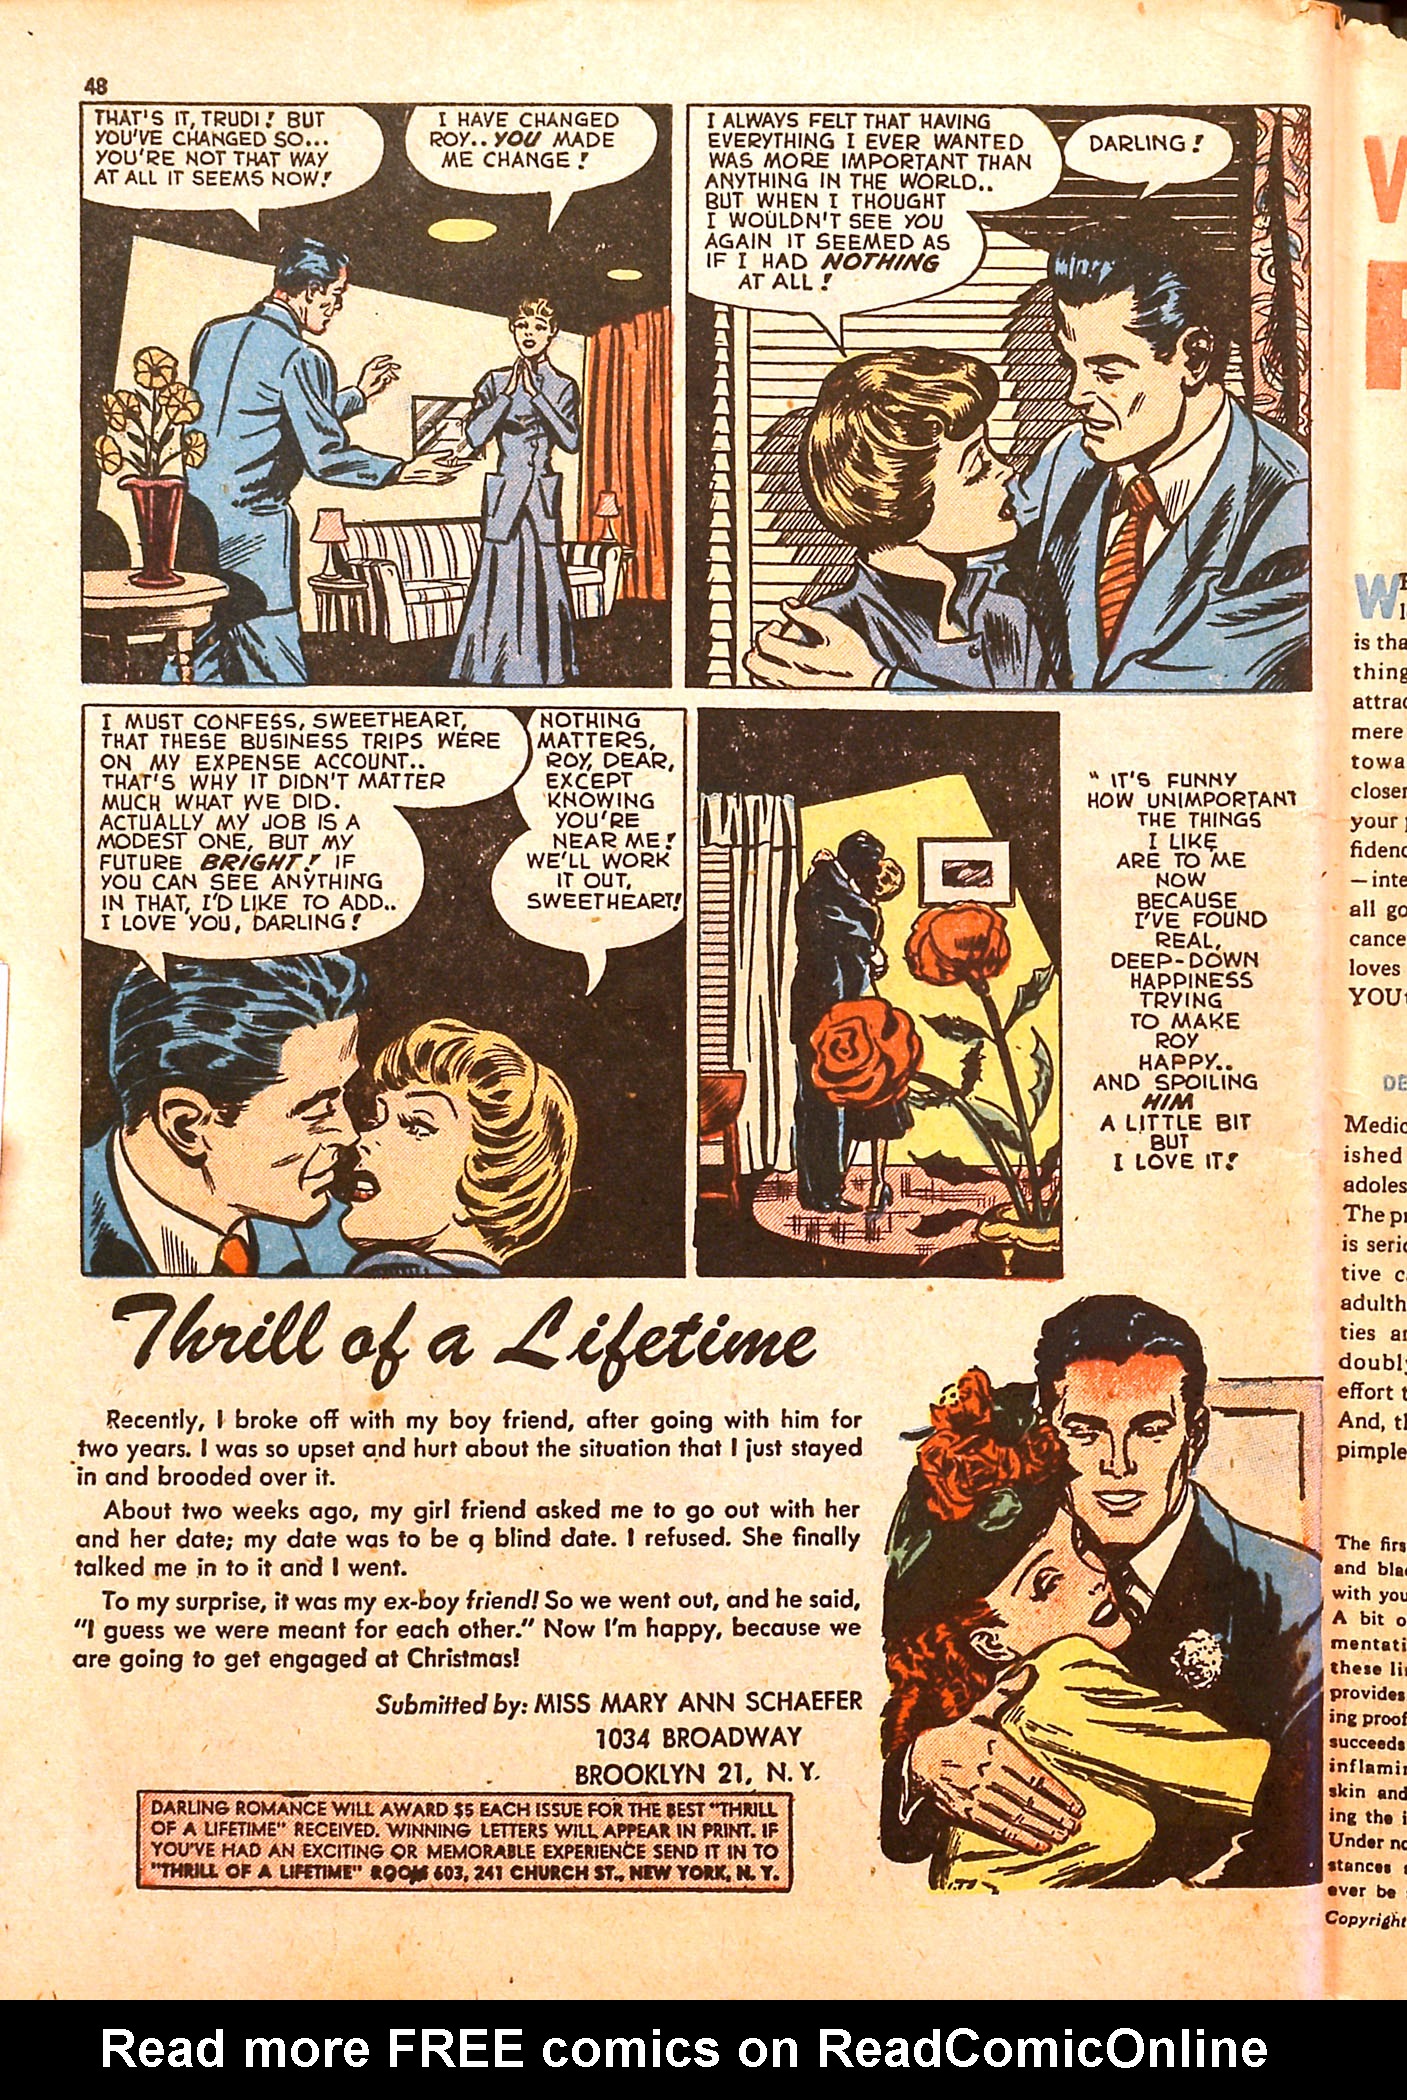 Read online Darling Romance comic -  Issue #5 - 48